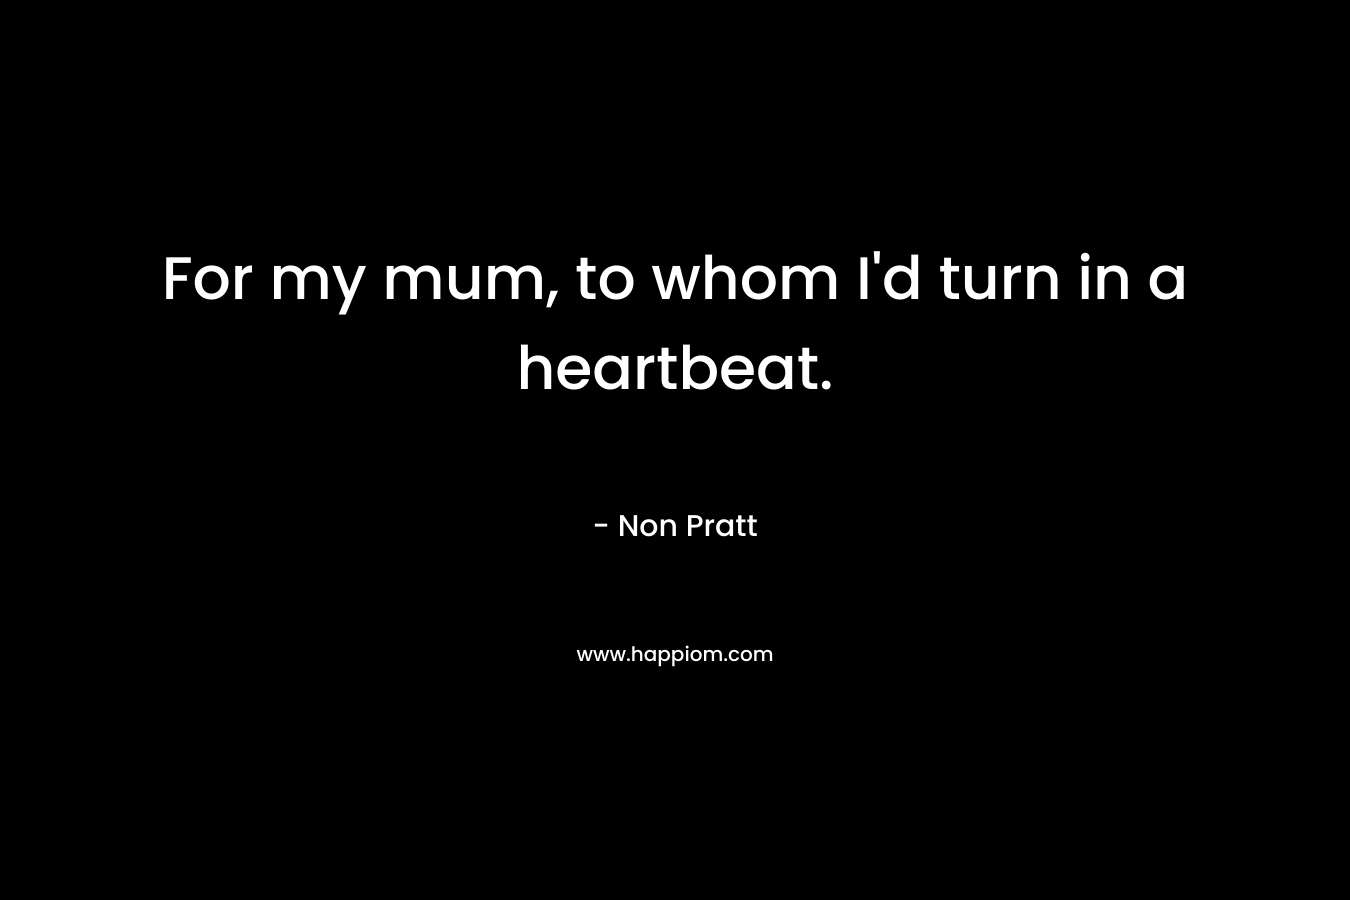 For my mum, to whom I'd turn in a heartbeat.